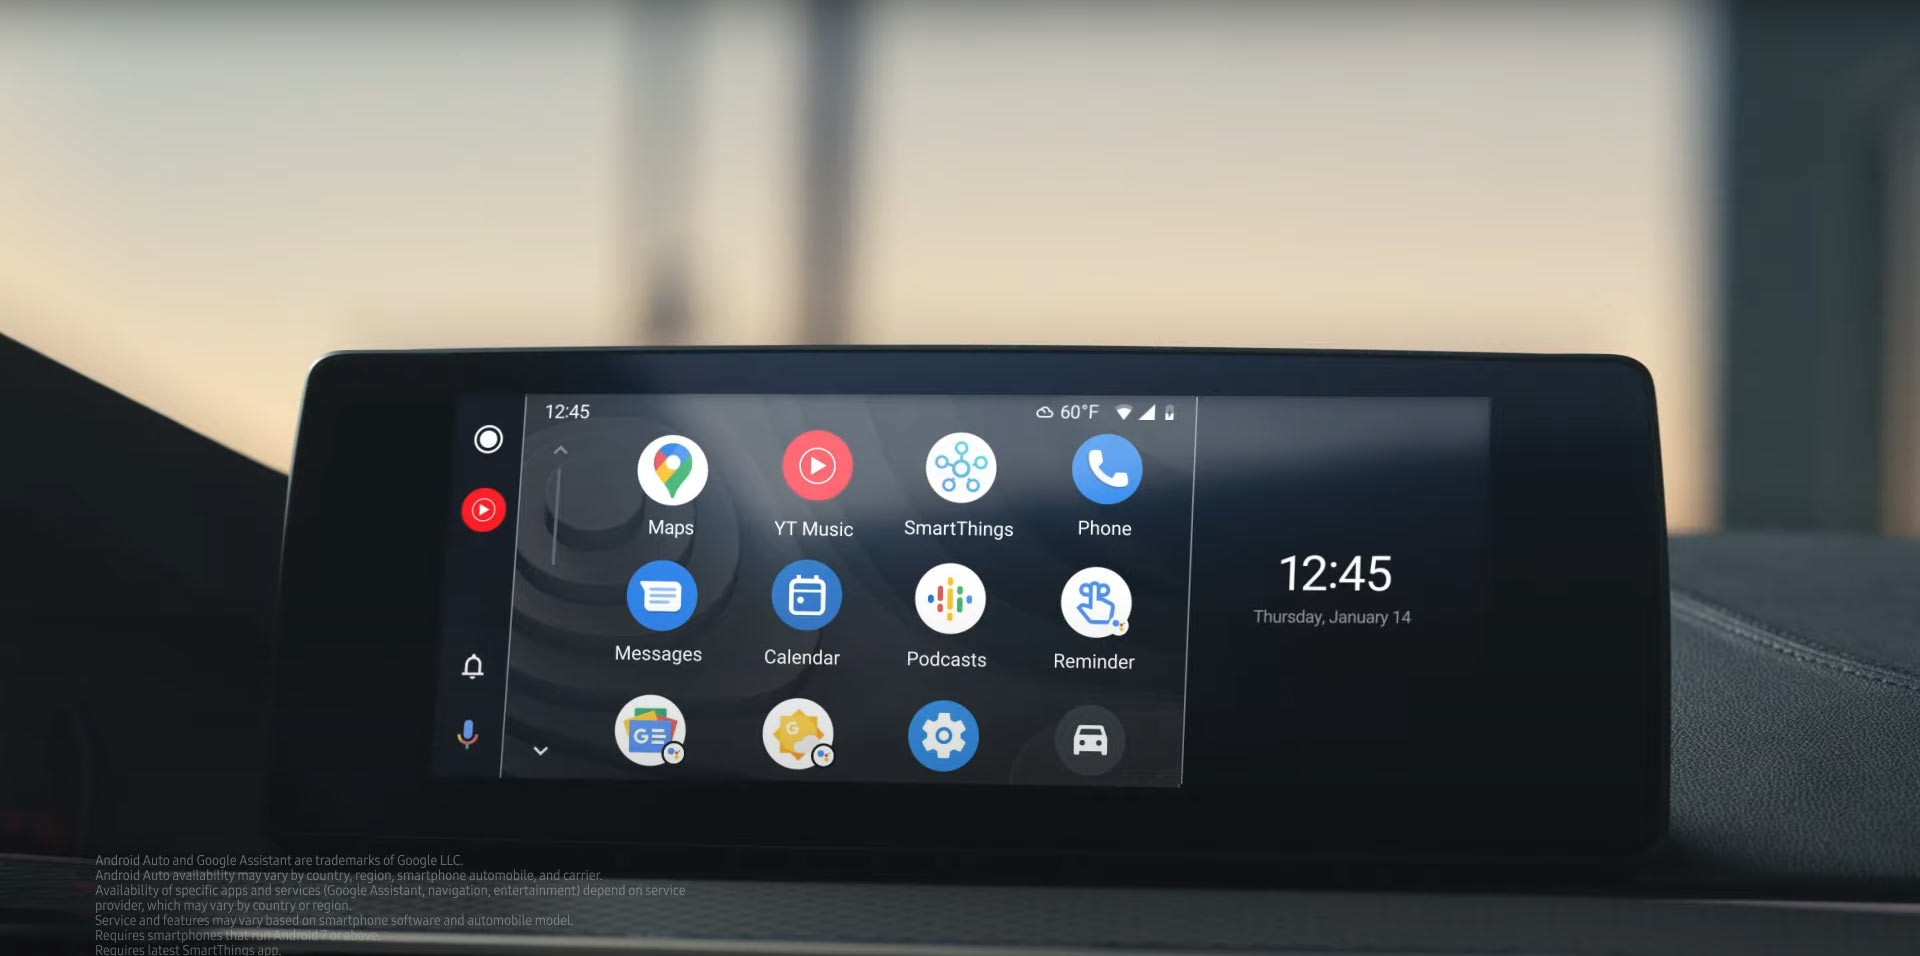 Samsung Announces Digital Key Partnership With Audi, BMW, Ford And ...